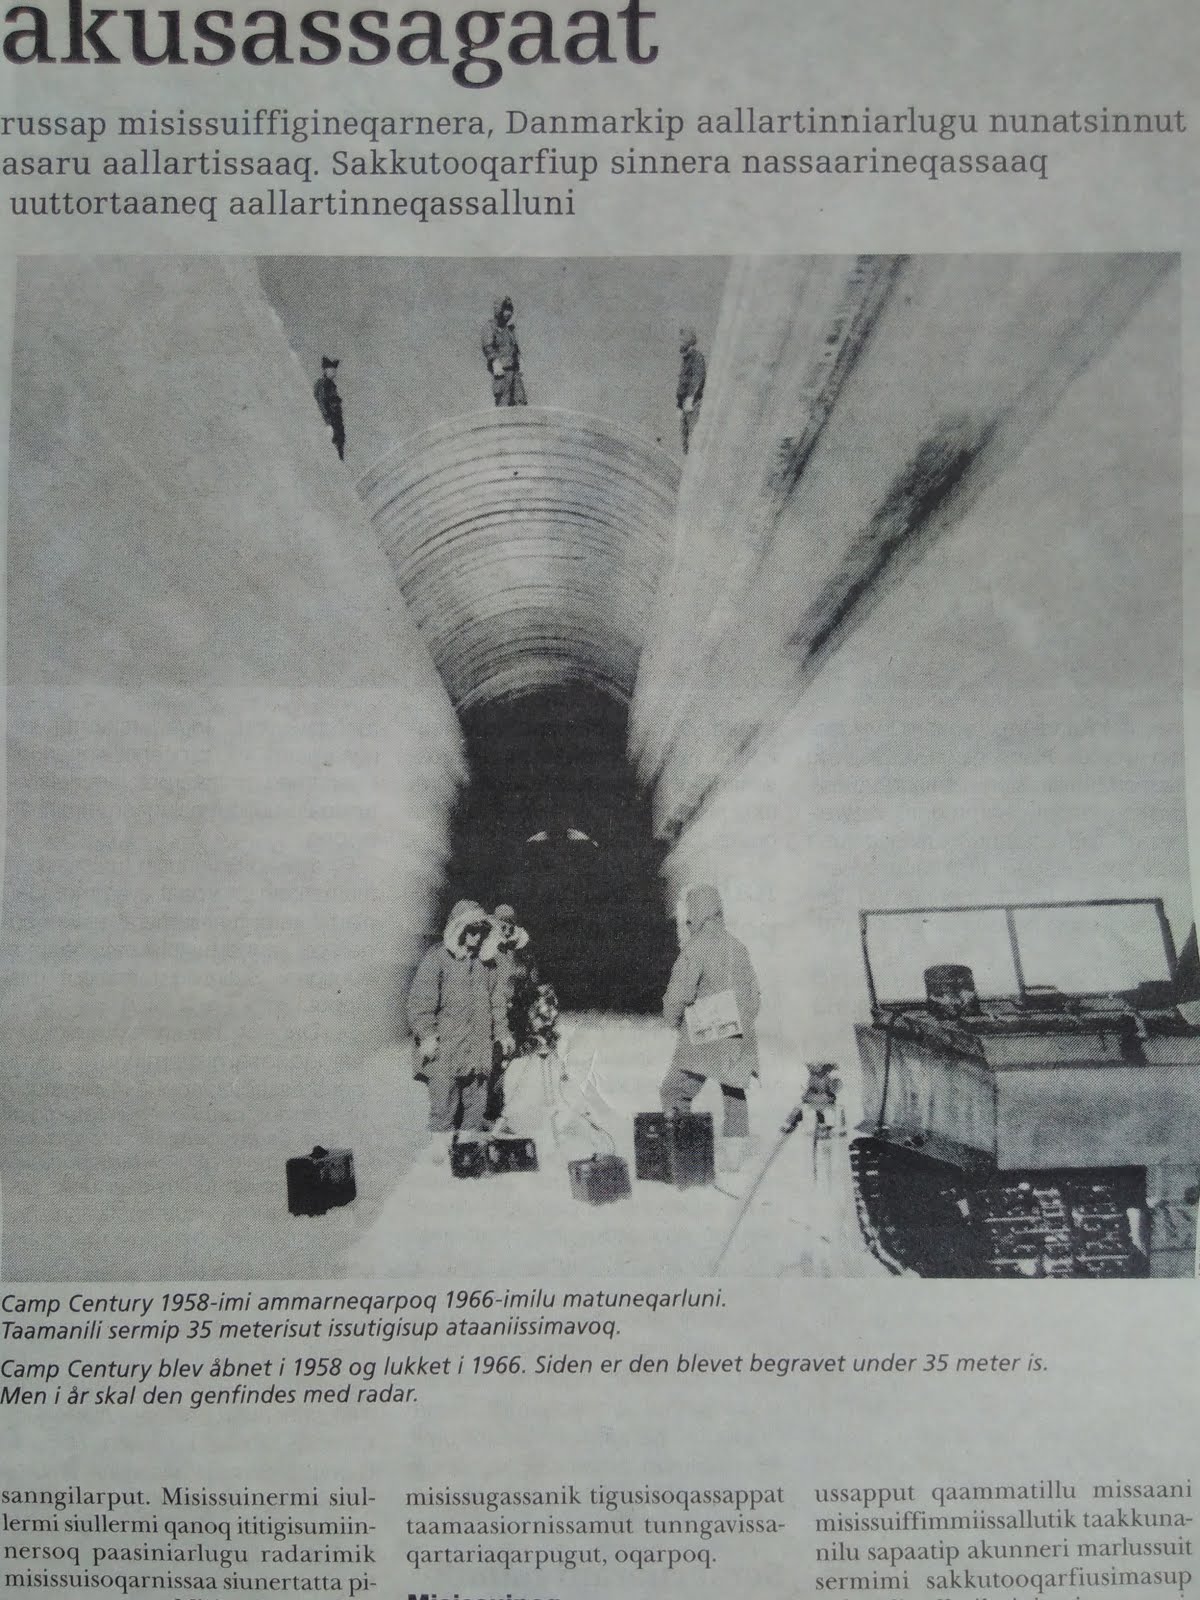 Daily newspaper article about Camp Century, Greenland